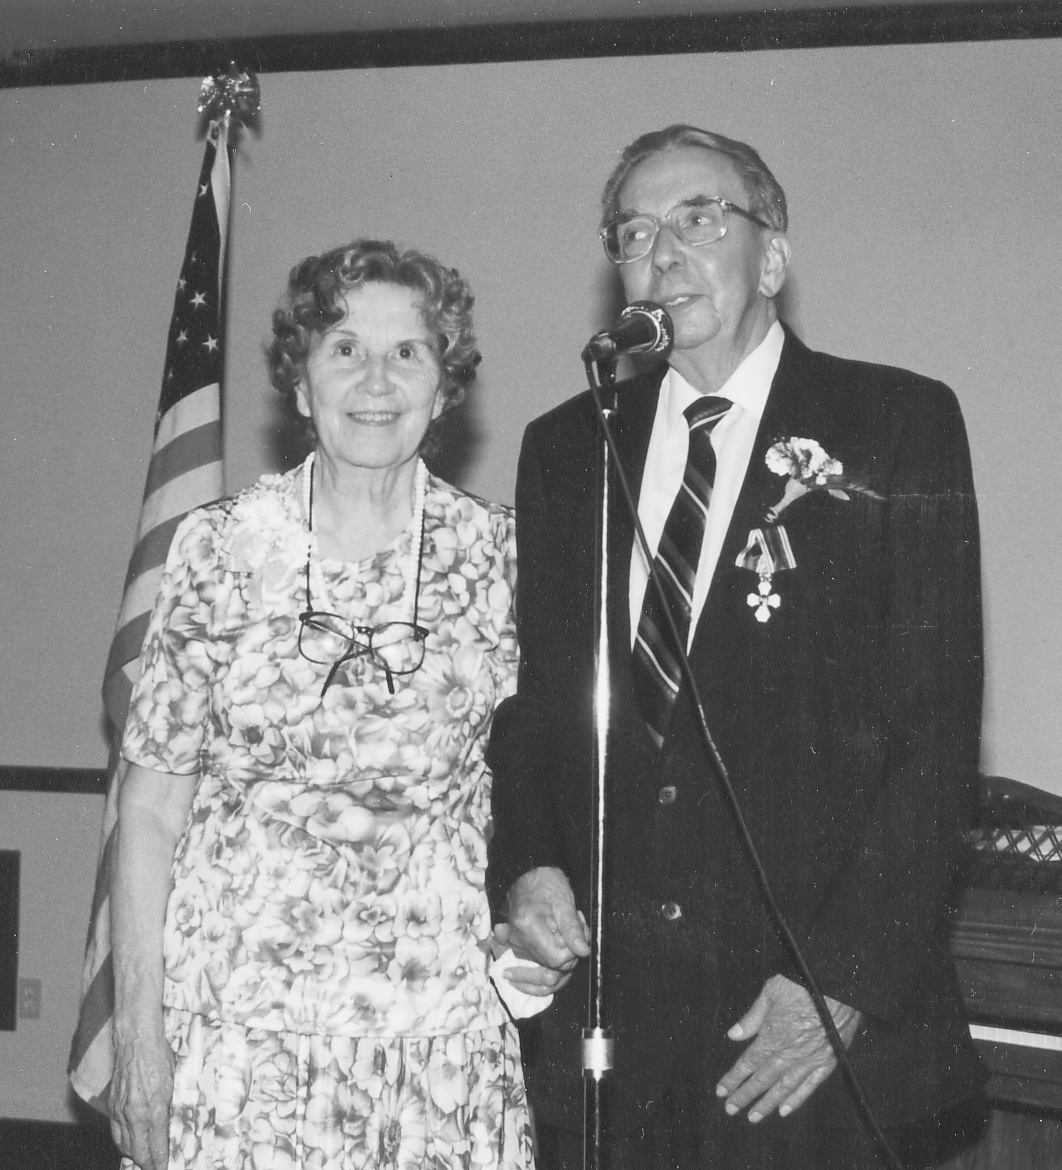 Byron and Melva Geslison were called to serve a second mission to Iceland in 1983 after the tragic deaths of Páll Ragnarsson and Gunnar Óskarsson. A decade later Byron received the Order of the Falcon. Courtesy of Daniel Geslison